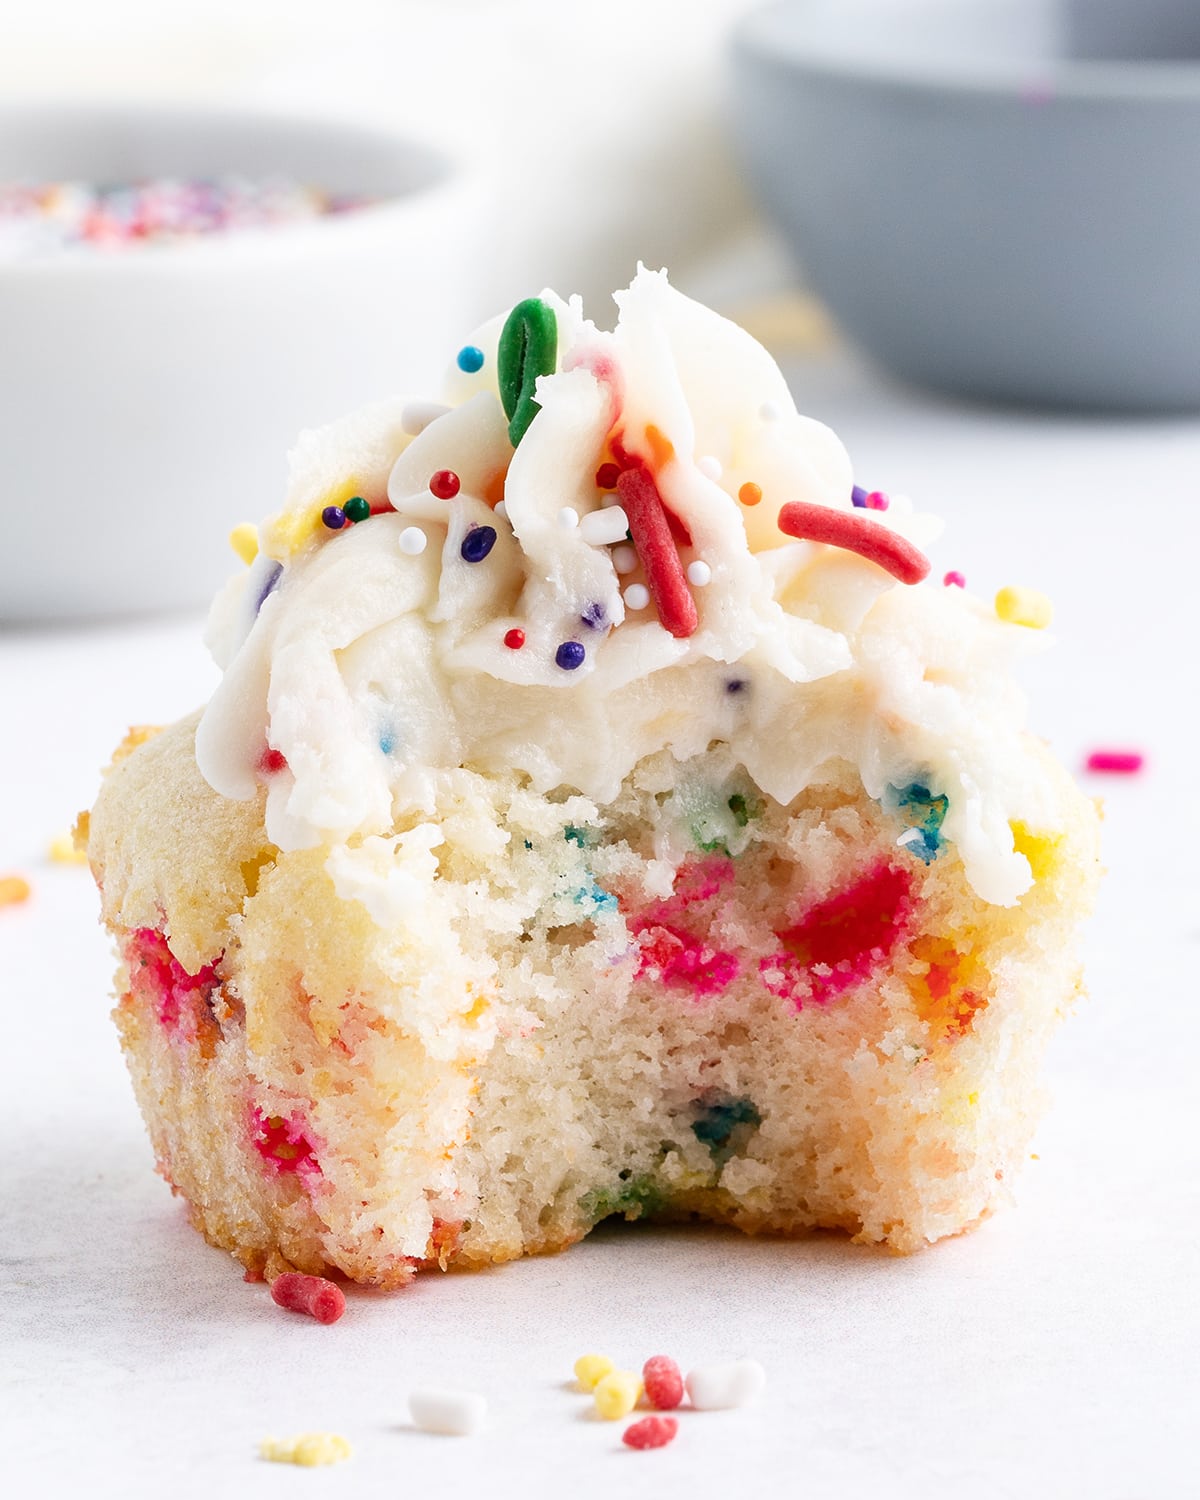 A cupcake with sprinkles, and a bite taken out of it.